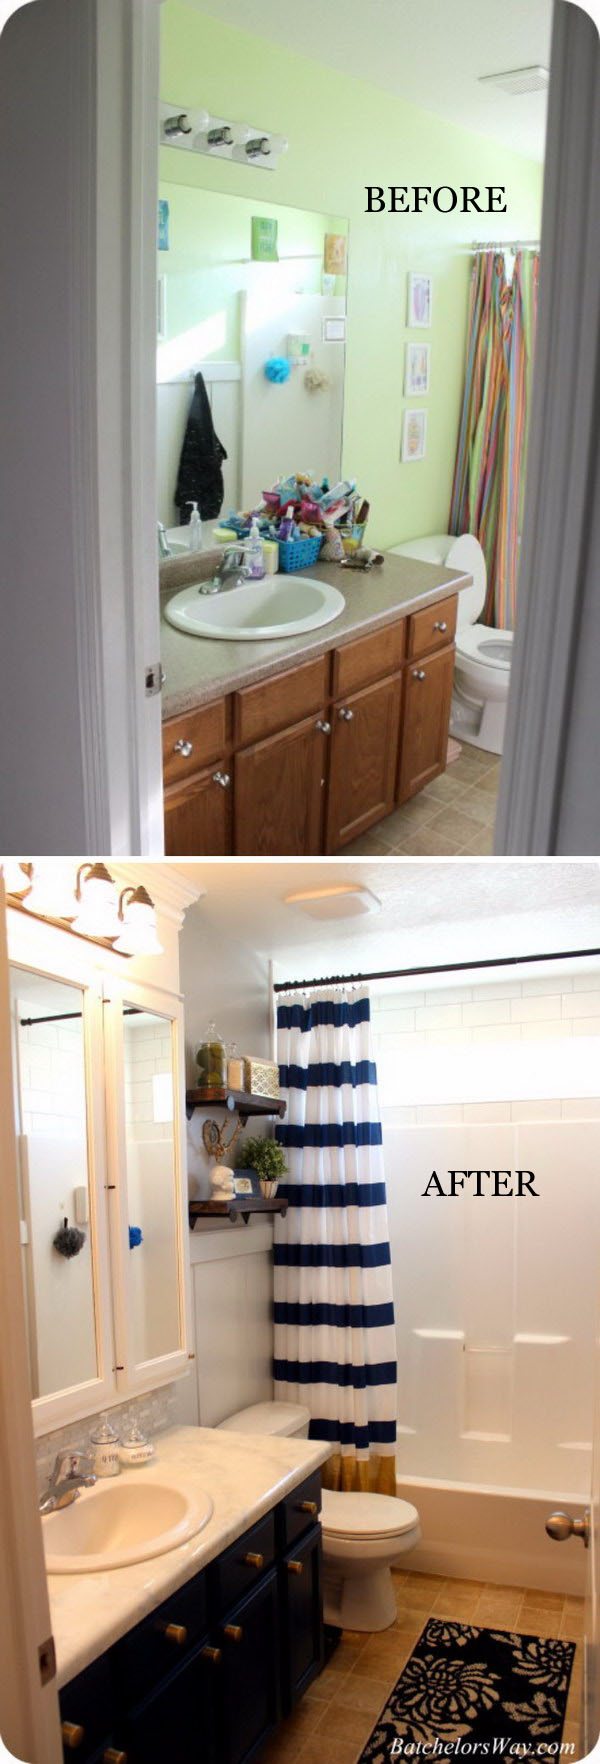 51-52-bathroom-remodel-before-and-after